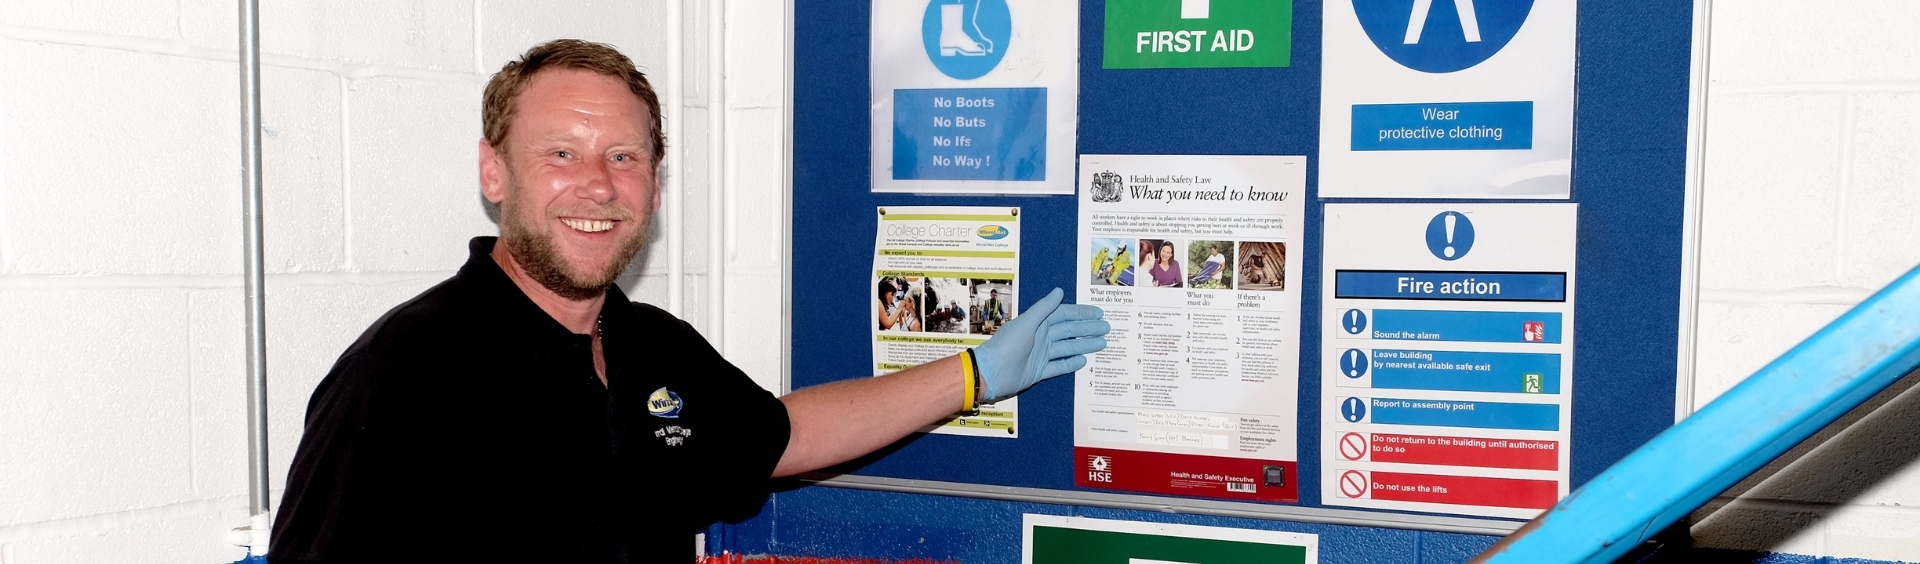 WMC Certificate in Fire Safety student pointing at Health and Safety noticeboard